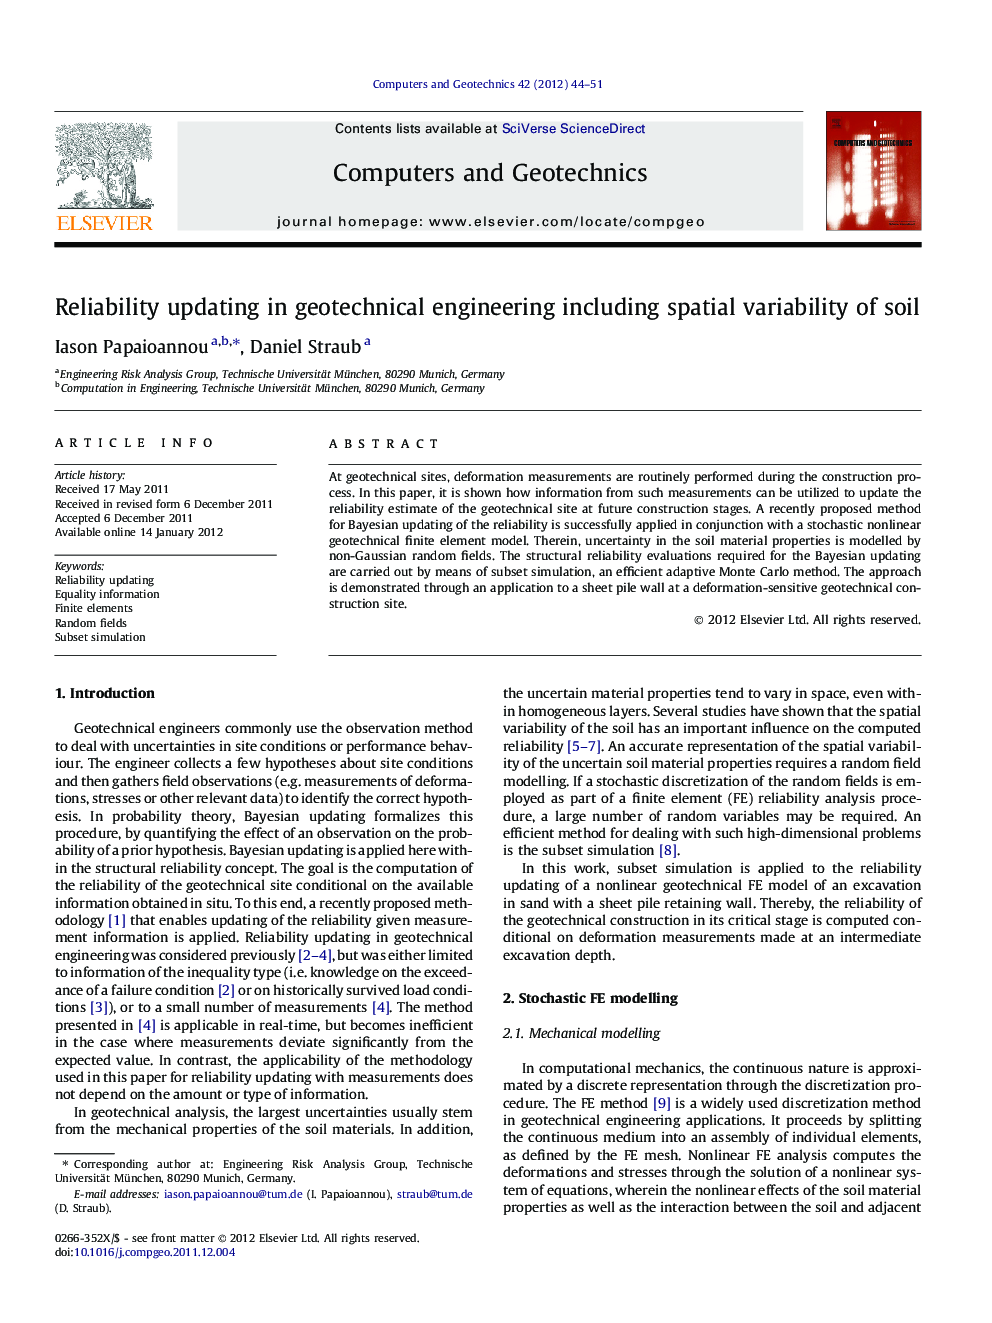 Reliability updating in geotechnical engineering including spatial variability of soil